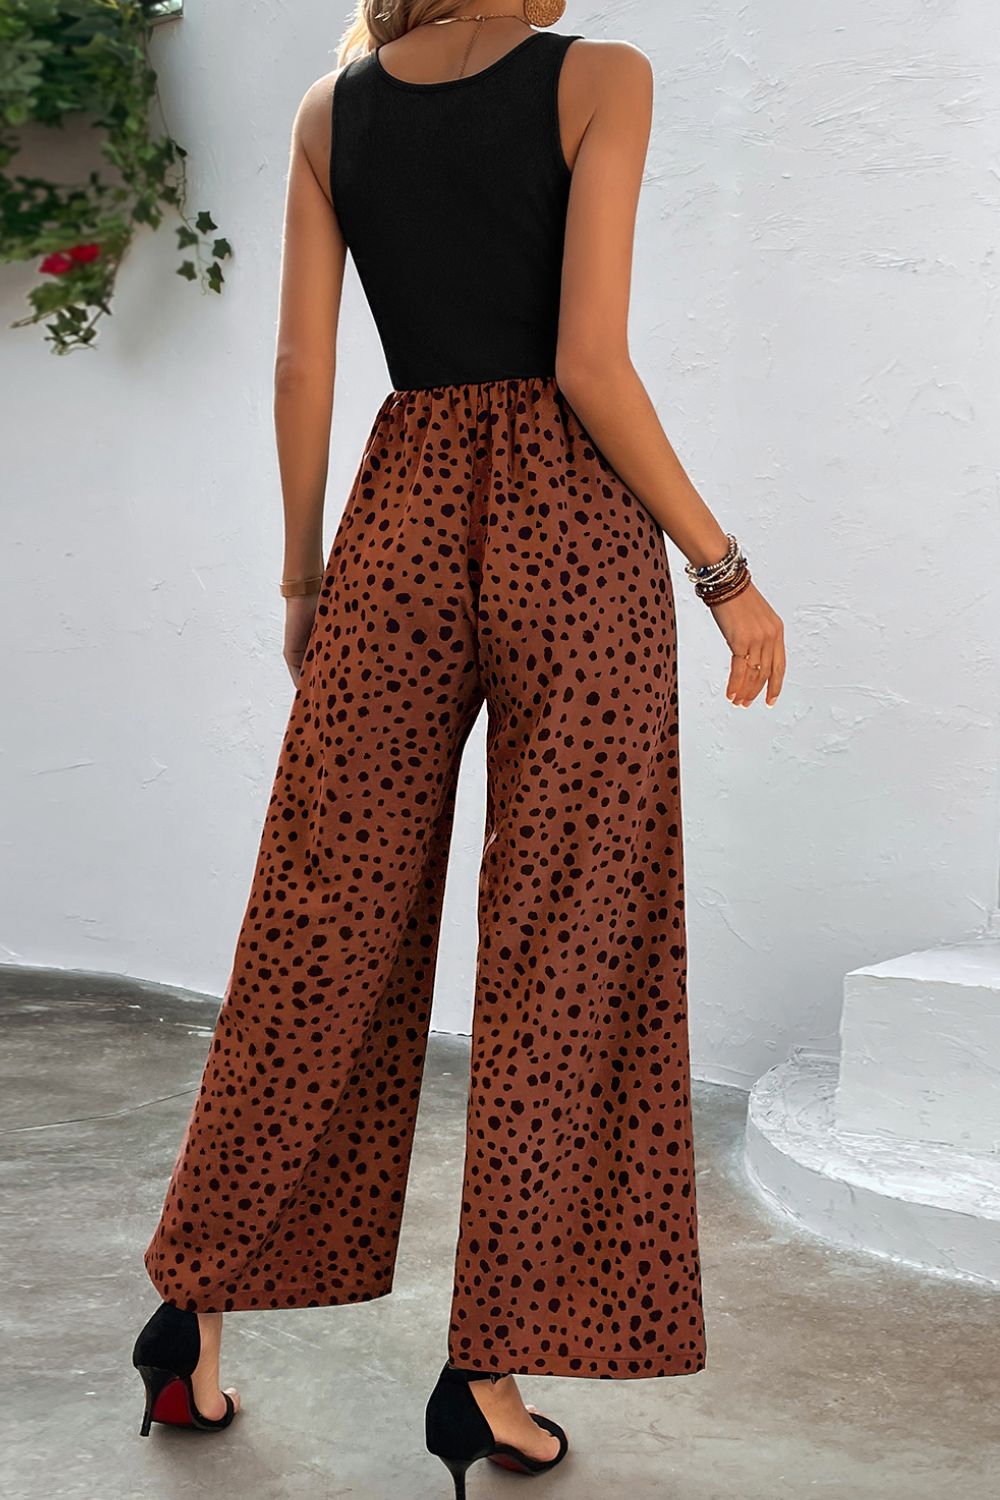 Leopard Lovin' Jumpsuit - Unleash Your Inner Wild Child and Embrace Sensual Elegance - Feel Confident, Daring and Irresistibly Alluring. - Guy Christopher